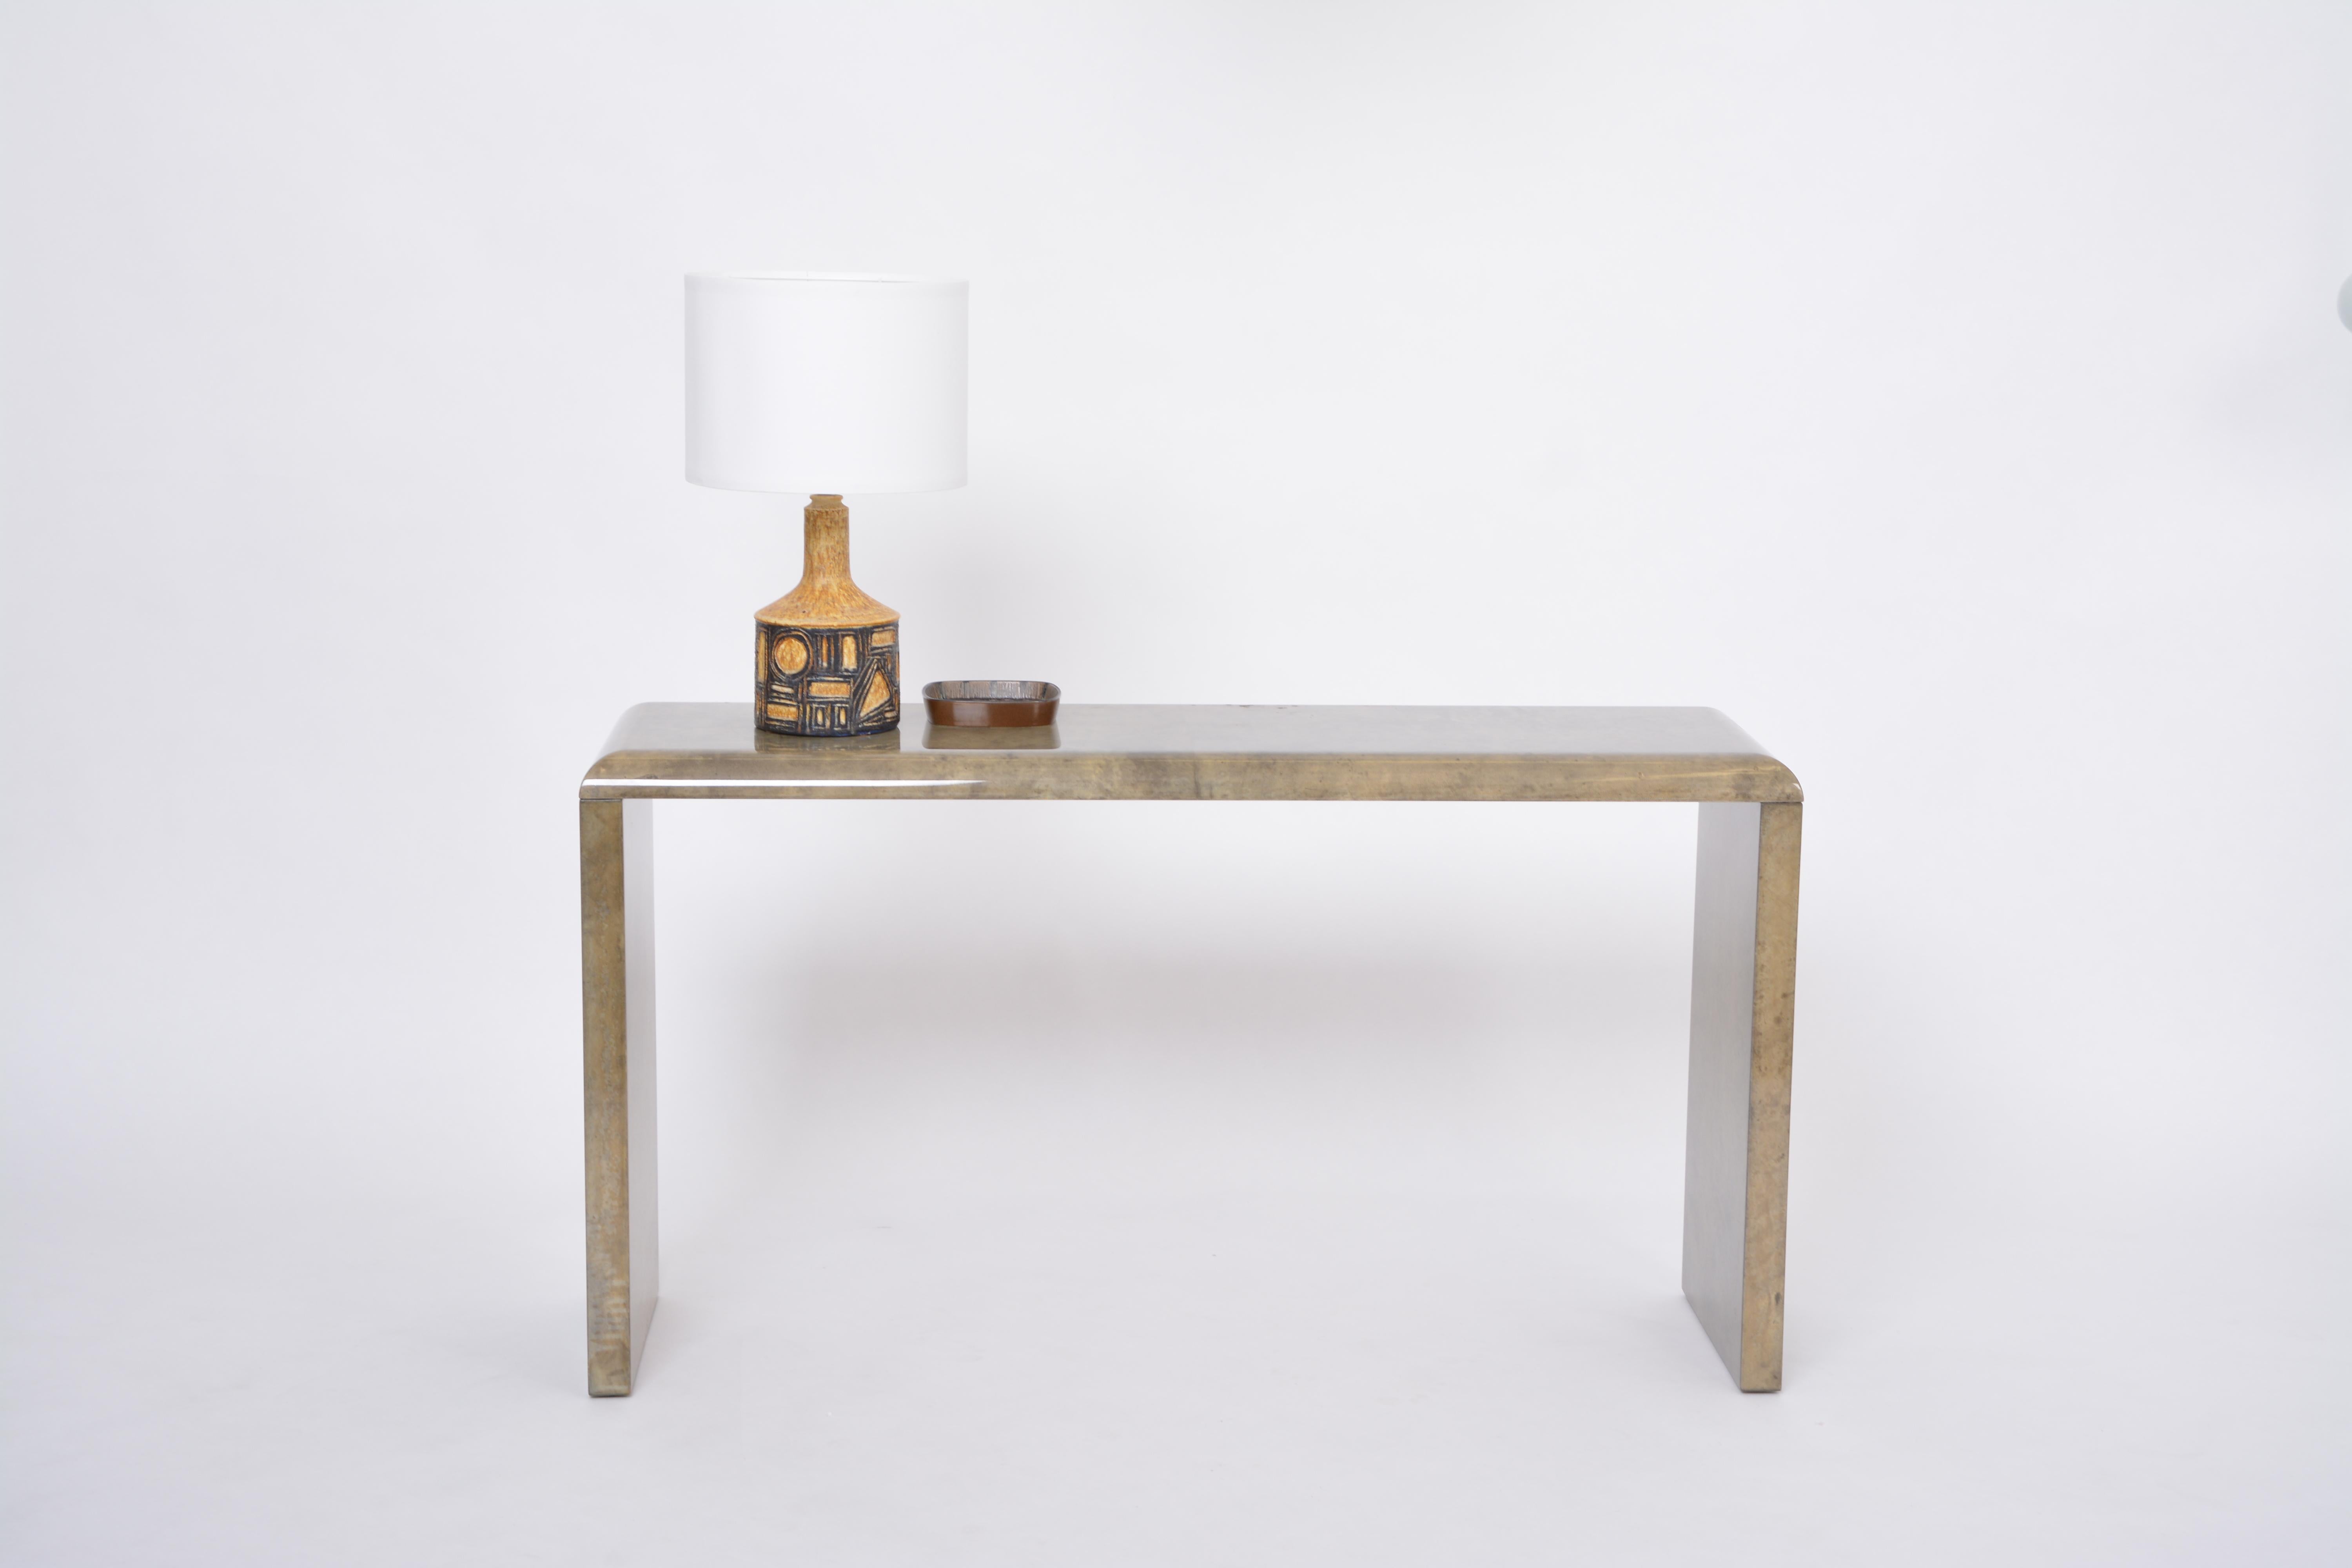 Italian Mid-Century Modern Console Table Made of Laquered Goat Skin by Aldo Tura